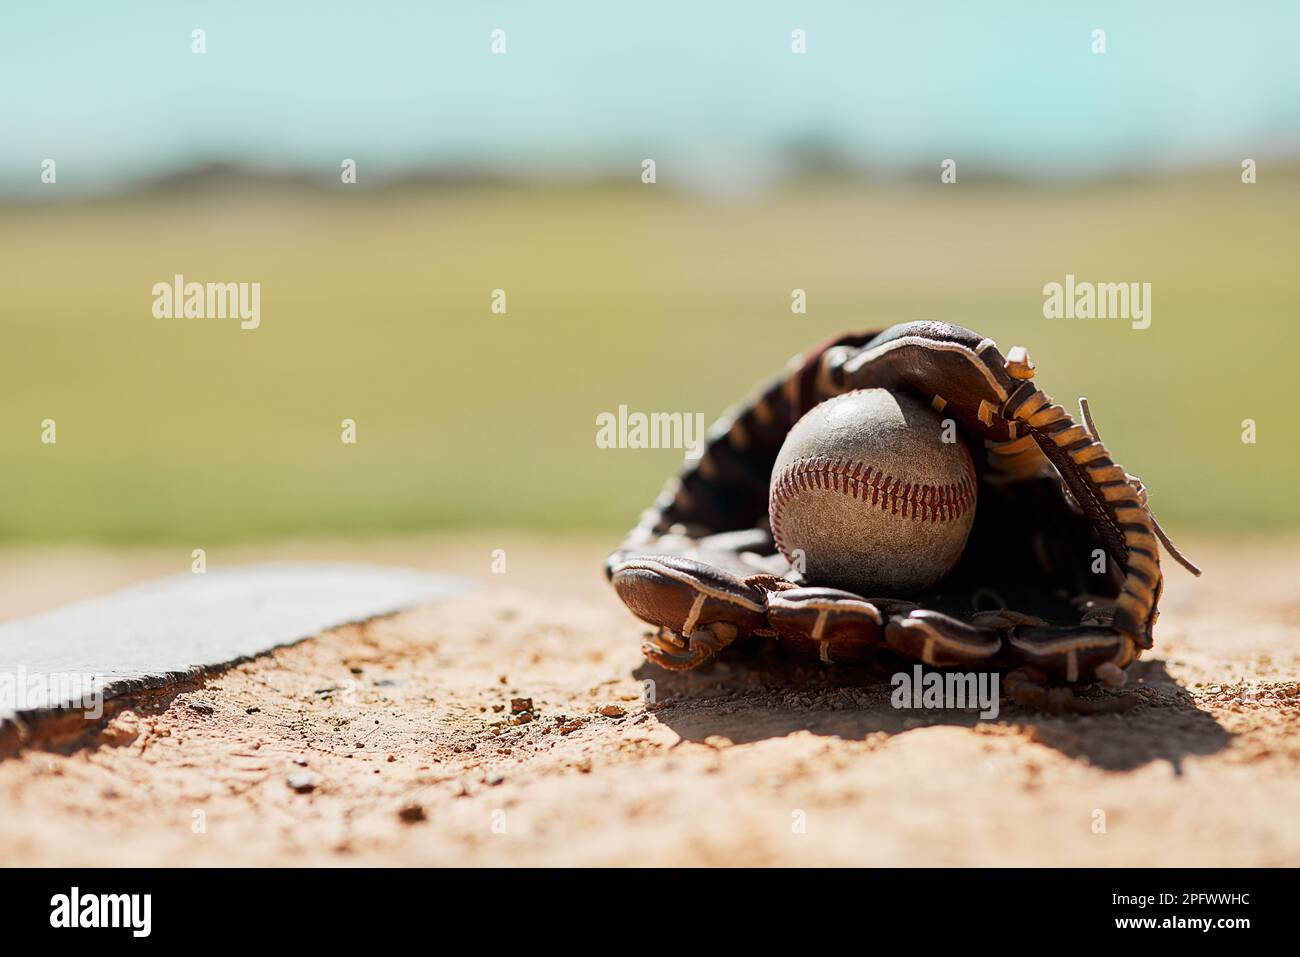 Step up to the plate. a baseball mitt and ball lying on the pitch during the day. Stock Photo